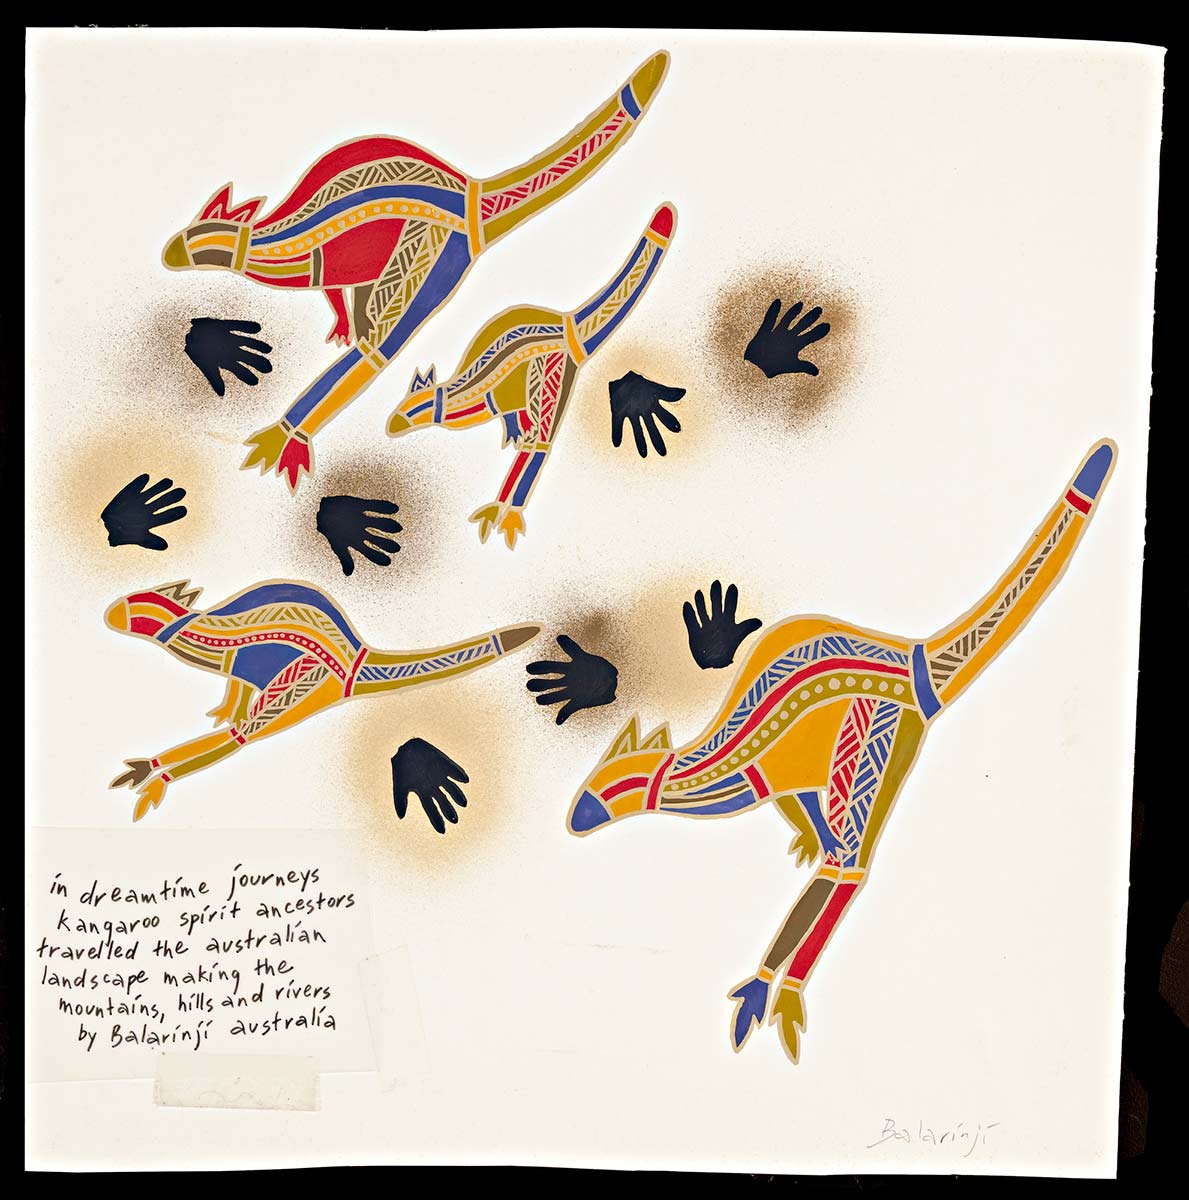 A gouache painting on paper. The design features four kangaroos of various sizes, facing left. Each kangaroo is multicoloured with red, blue, olive green, yellow ochre and brown in an X-ray style that is outlined in beige. There are several black handprints, each within dark ochre 'smudge'. In the lower left corner is a transparency of text taped on that reads 'in dreamtime journeys kangaroo spirit ancestors travelled ...'. The text 'Balarinji' is handwritten in pencil on the lower right hand corner of the art work. - click to view larger image